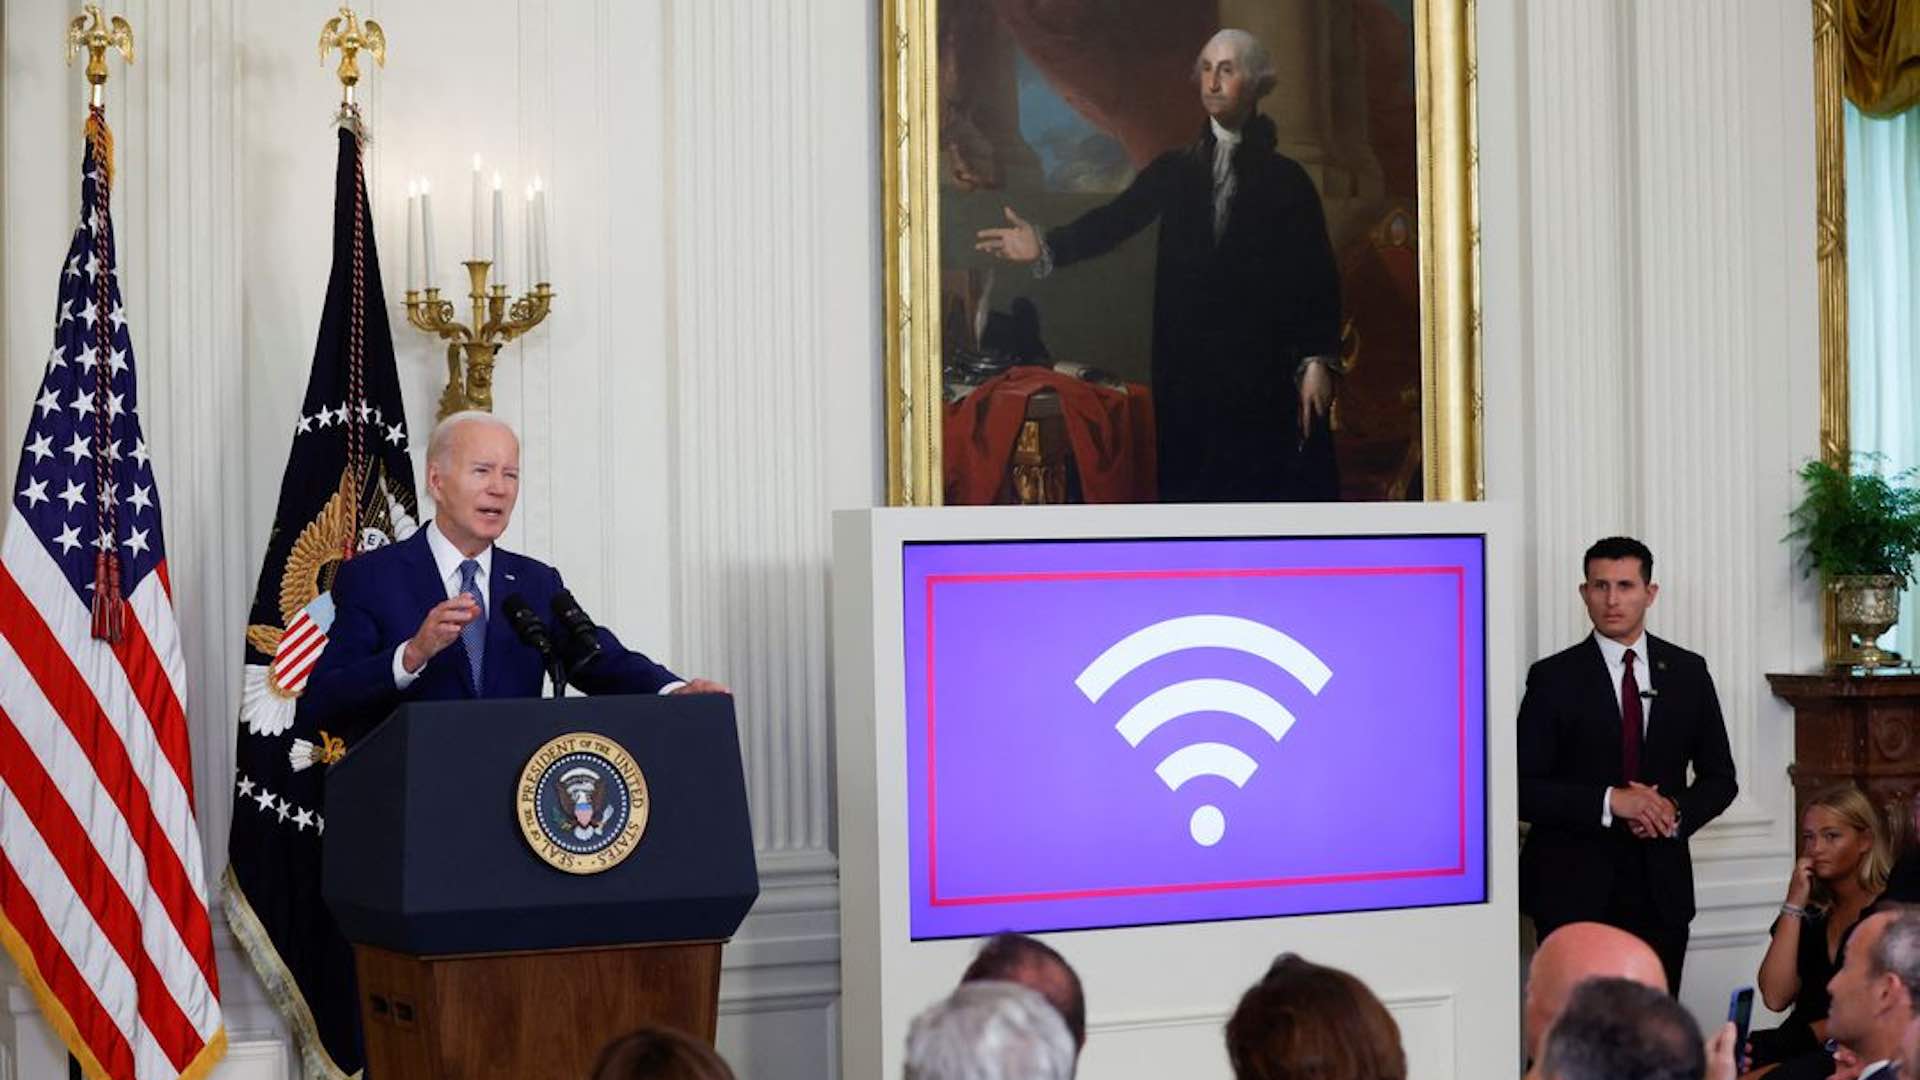 Bridging the digital divide with a $42 billion broadband commitment